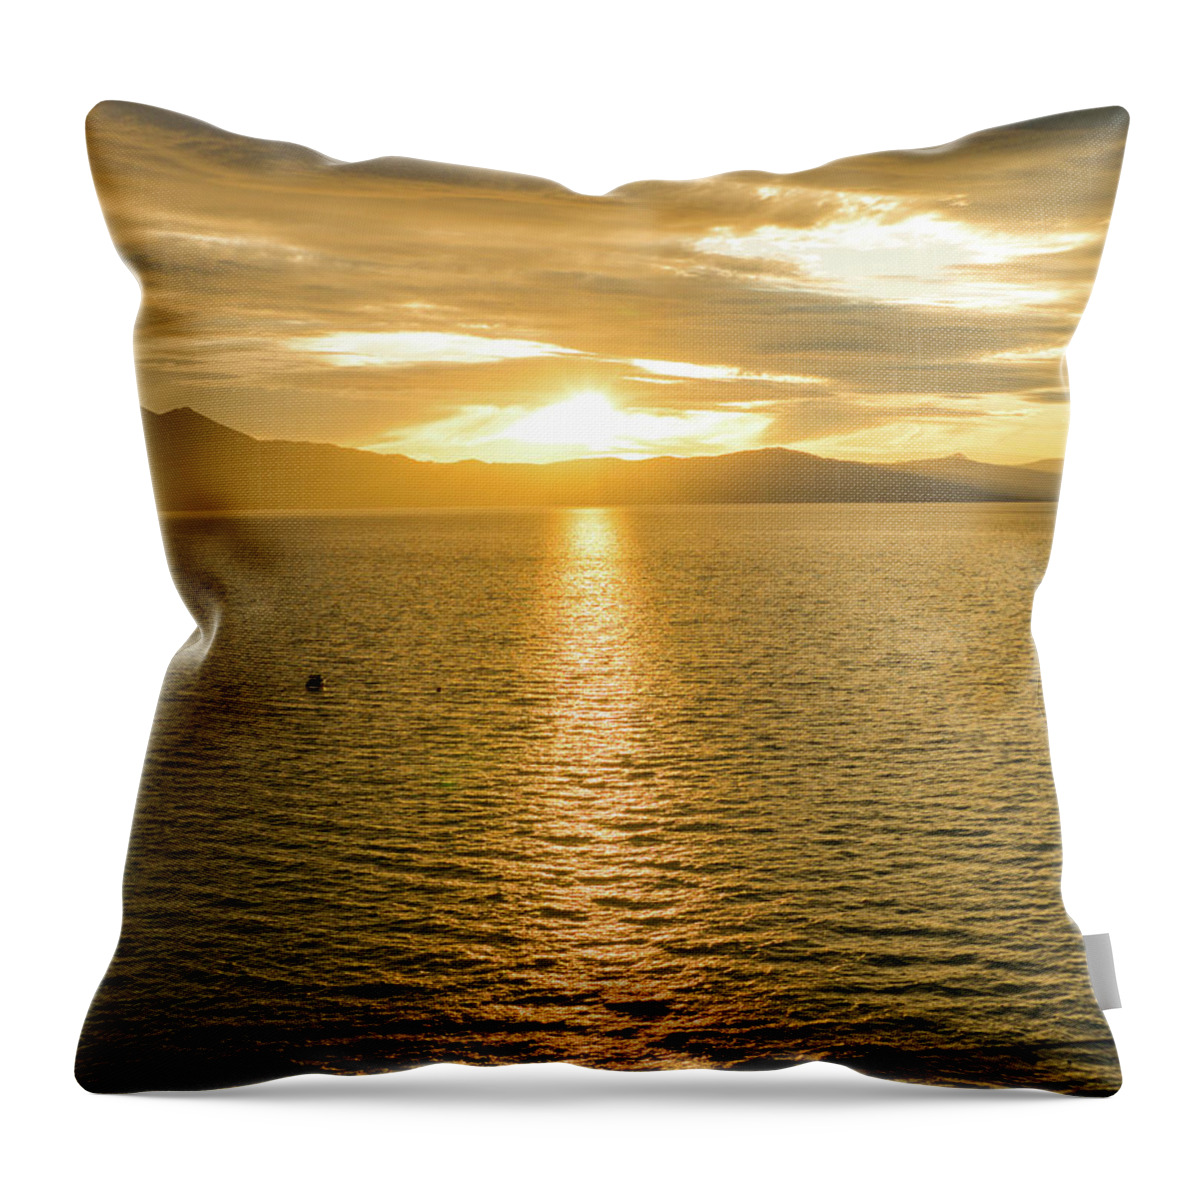 Lake Tahoe Throw Pillow featuring the photograph Golden Hour Lake Tahoe by Anthony Giammarino